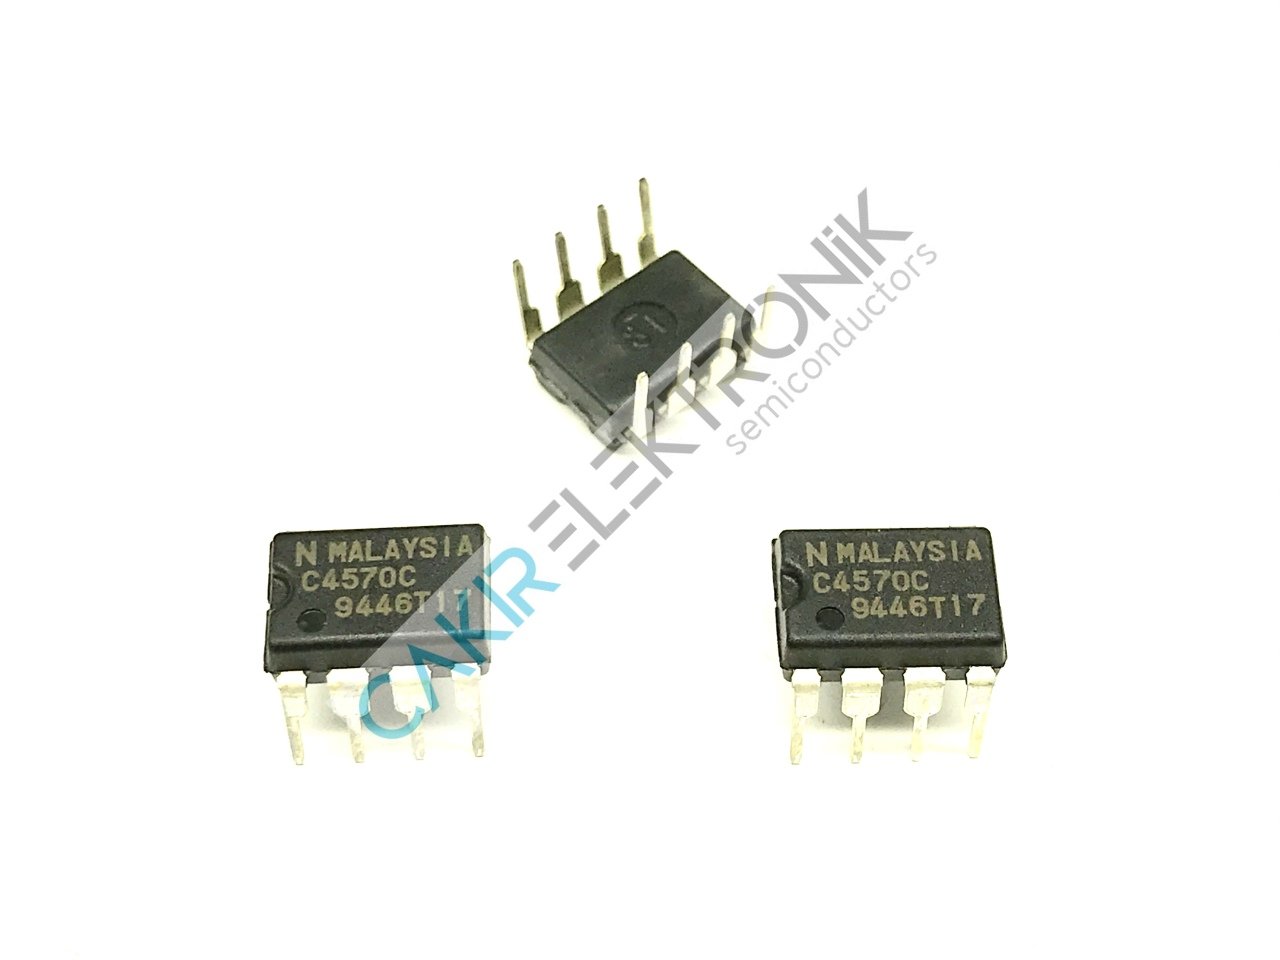 UPC4570C  - C4570C - DİP8 - Ultra Low-Noise, High-speed, Wide Band, Dual Operational Amplifier